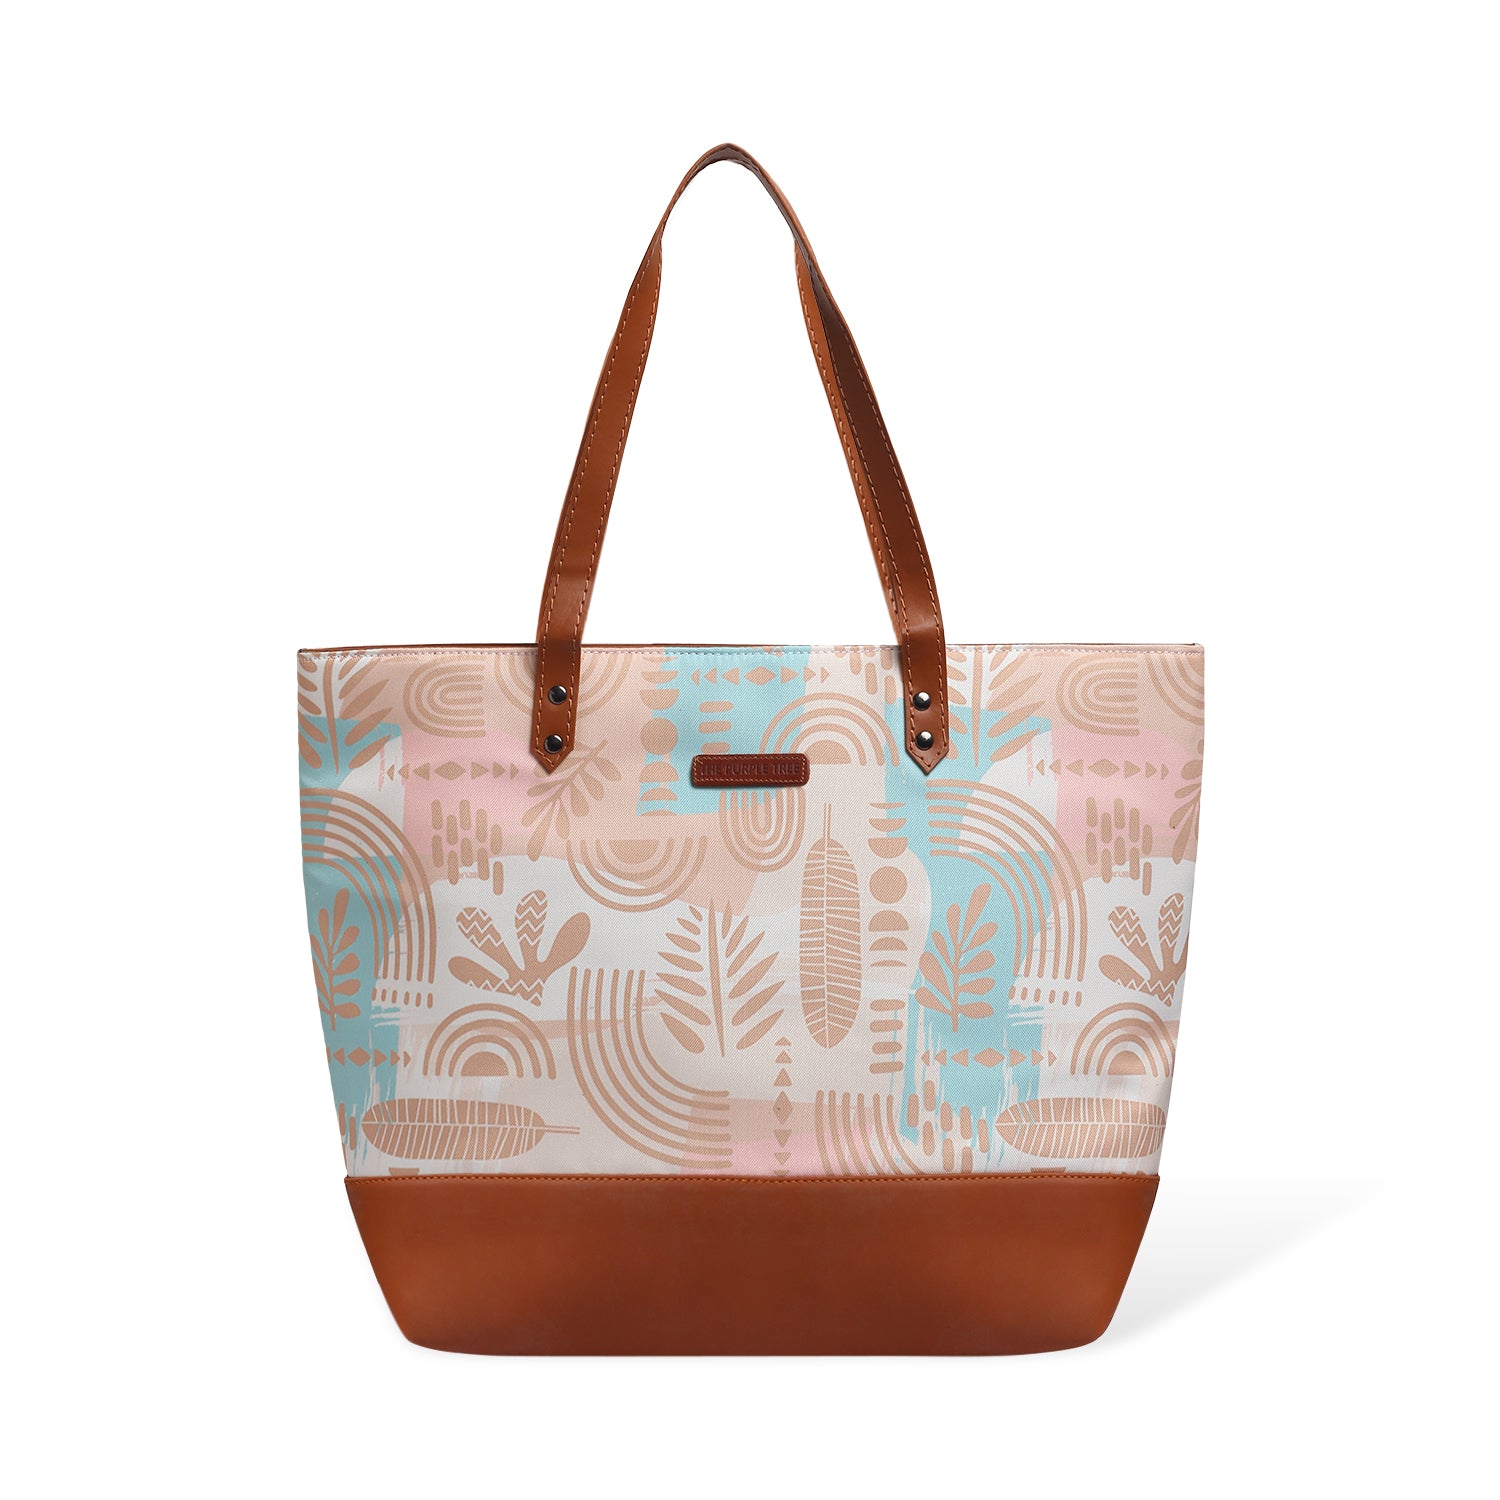 Trendy tote bag in light blue and pink pattern